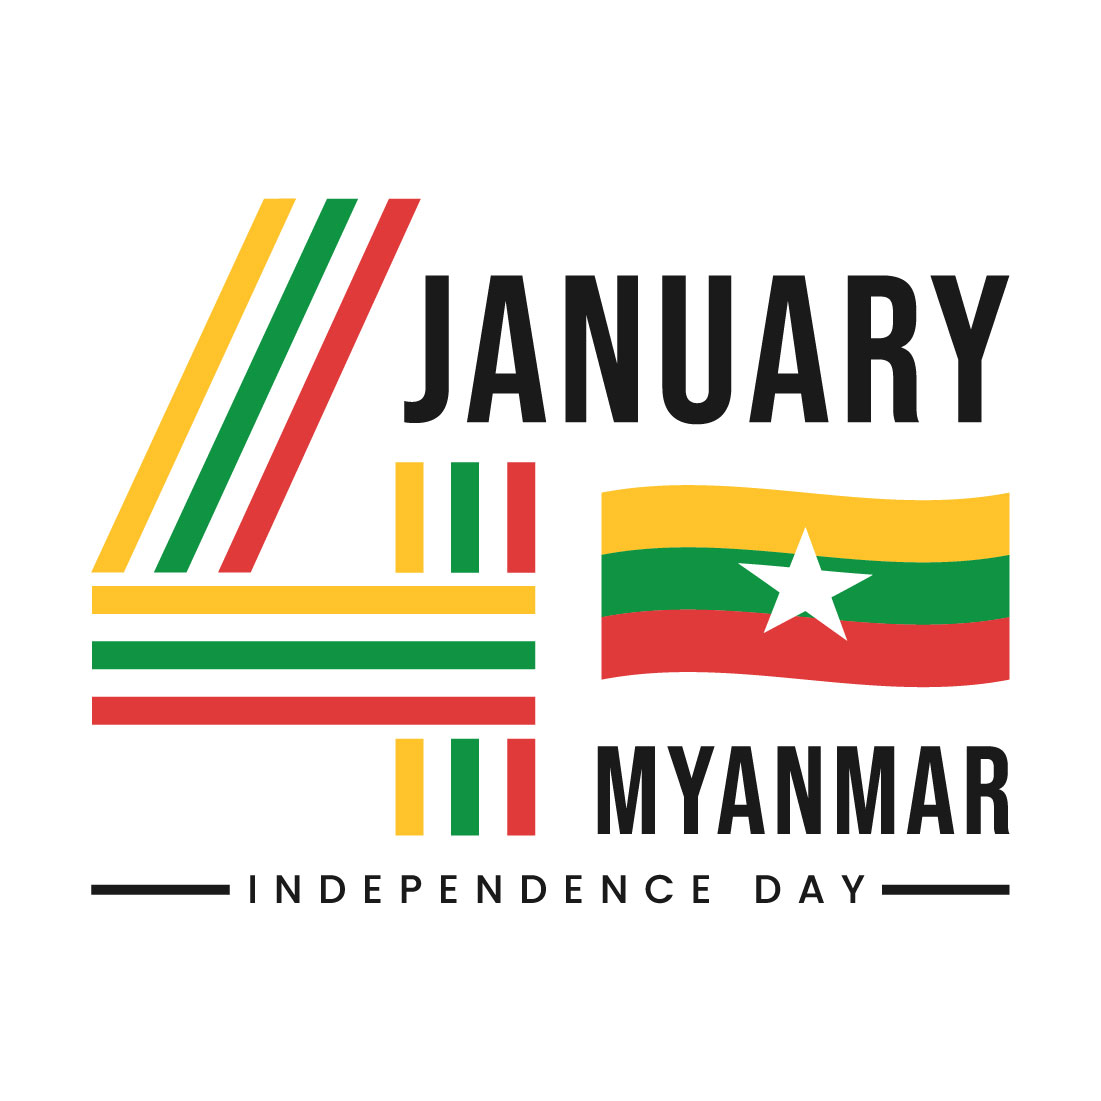 17 Myanmar Independence Day Illustration - main image preview.